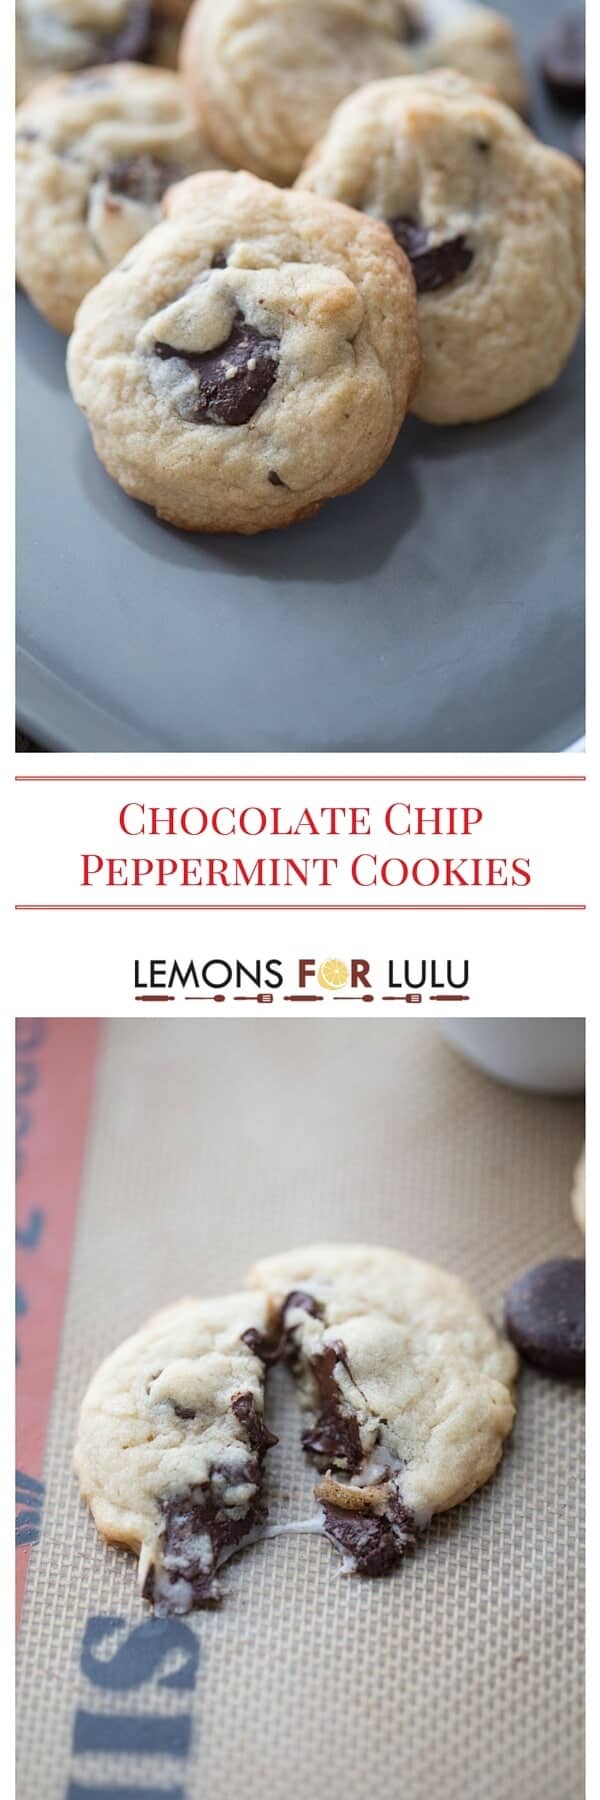 Love peppermint? Then this cookie recipe is for you! A soft cookie dough is filled with chocolate and lots of cool, creamy Peppermint Patty's!